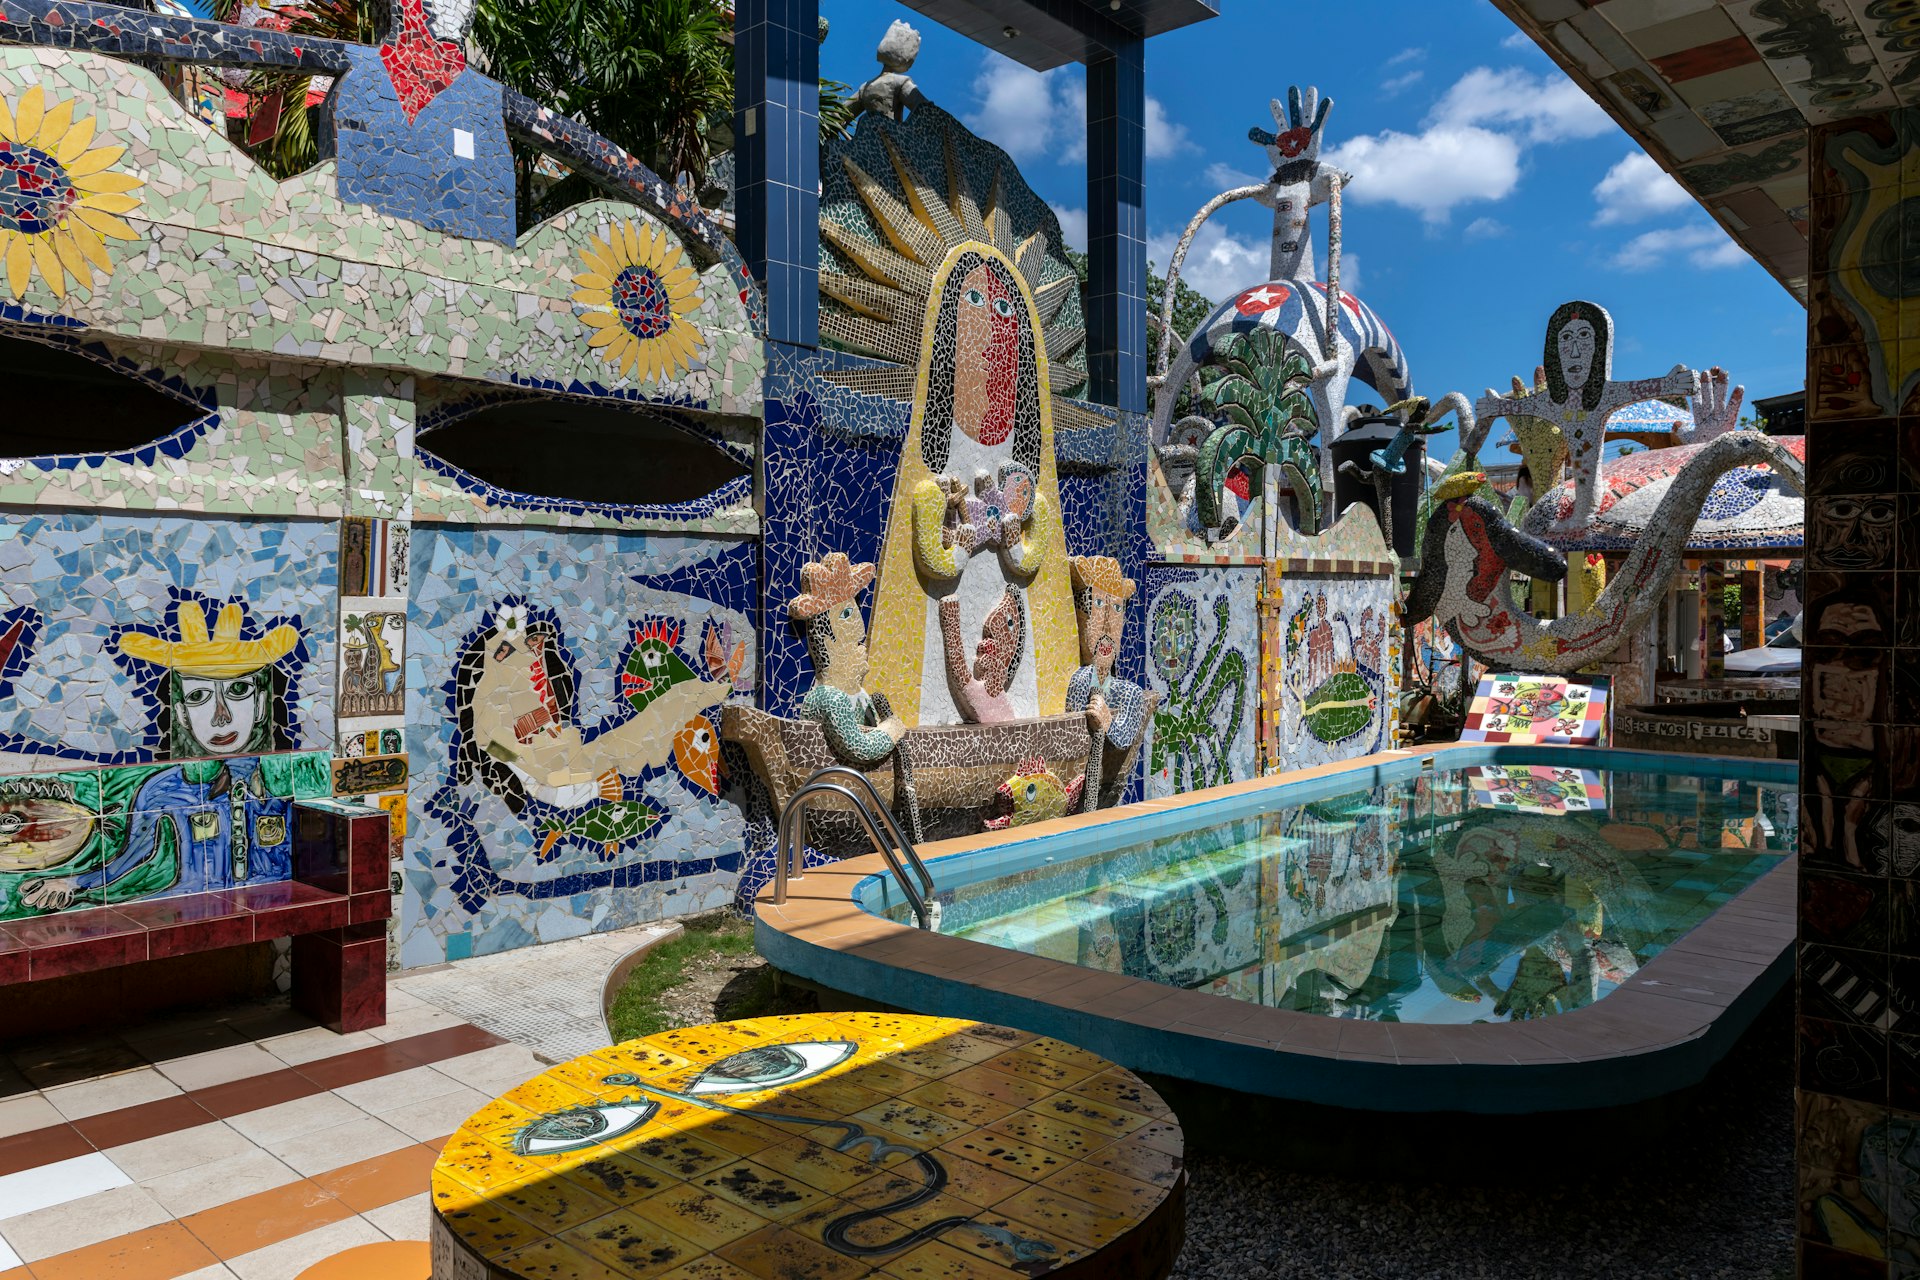 An outdoor pool area decorated with elaborate and colorful mosaic art in Jaimanitas, on the outskirts of Havana